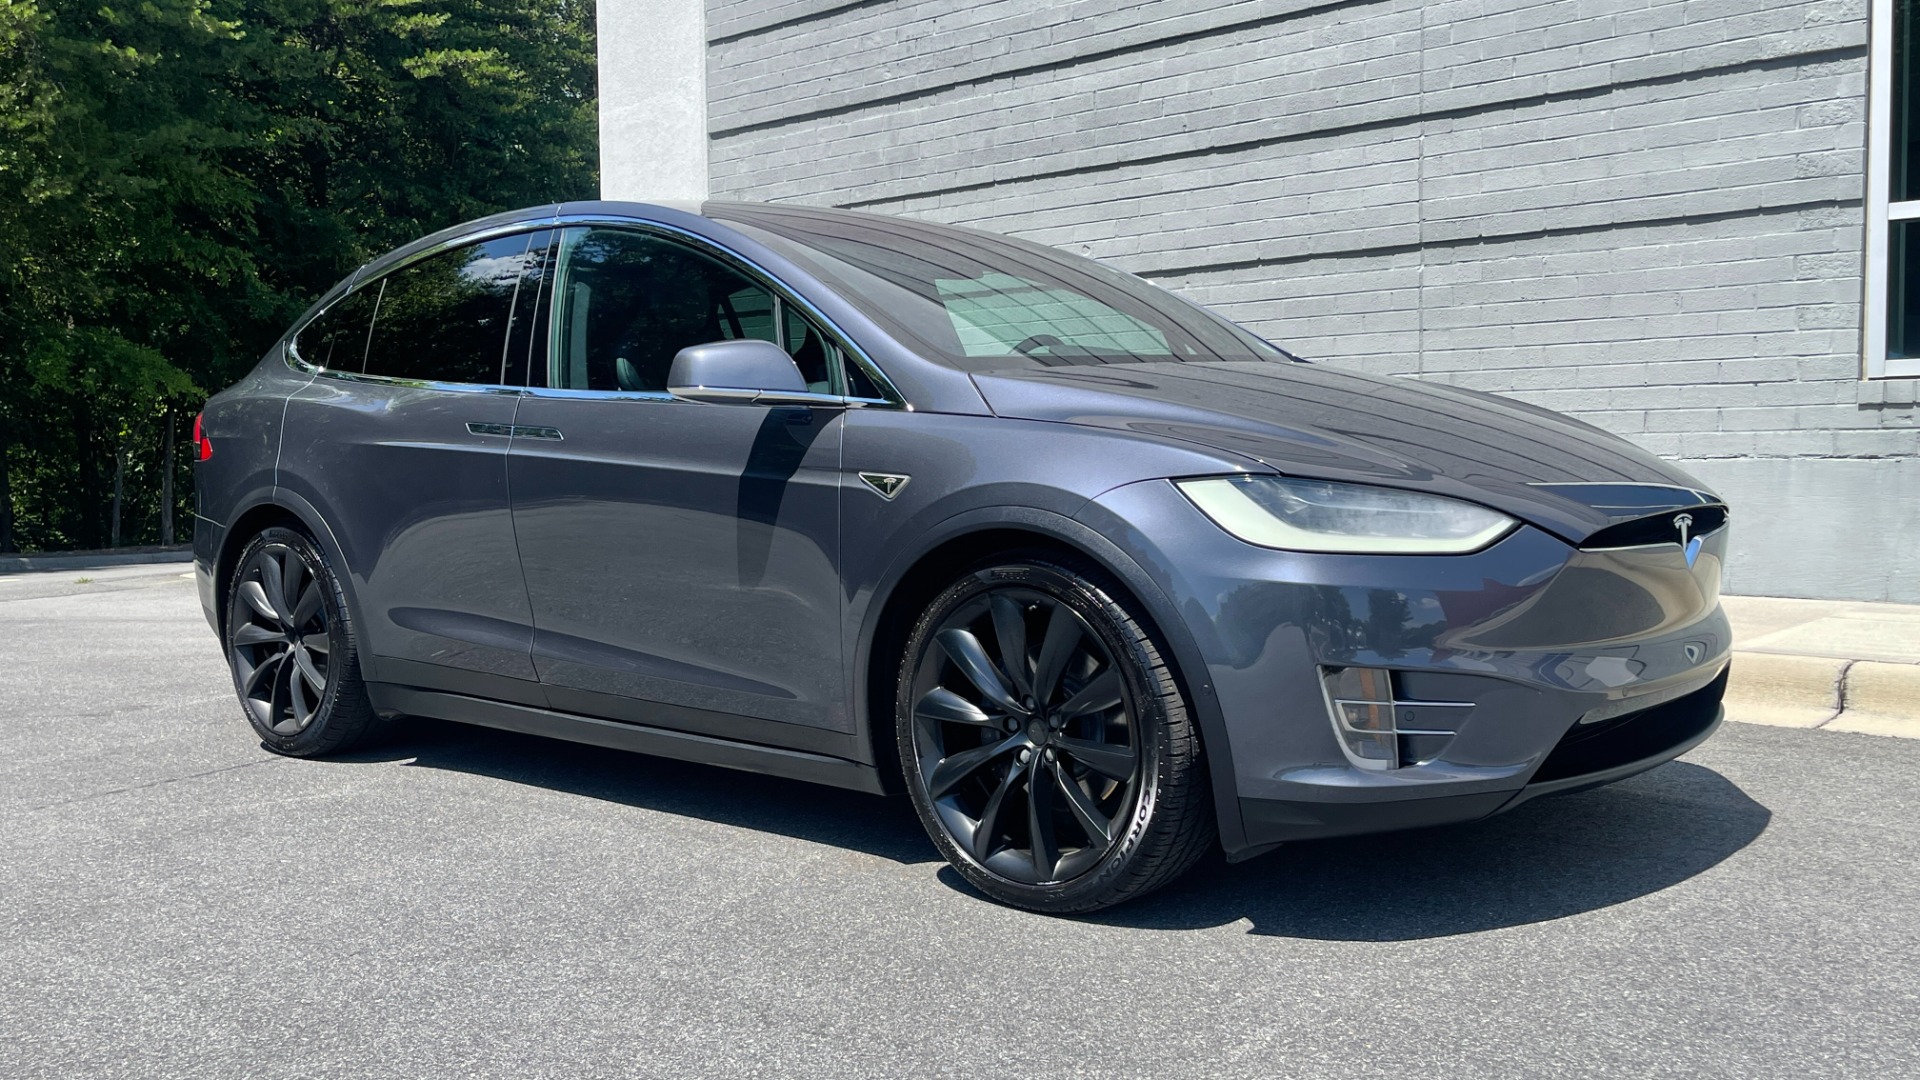 Used 2016 Tesla Model X 90D / AUTOPILOT / 3RD ROW / FALCON DOORS / ADJUSTABLE SUSPENSION for sale $62,995 at Formula Imports in Charlotte NC 28227 5